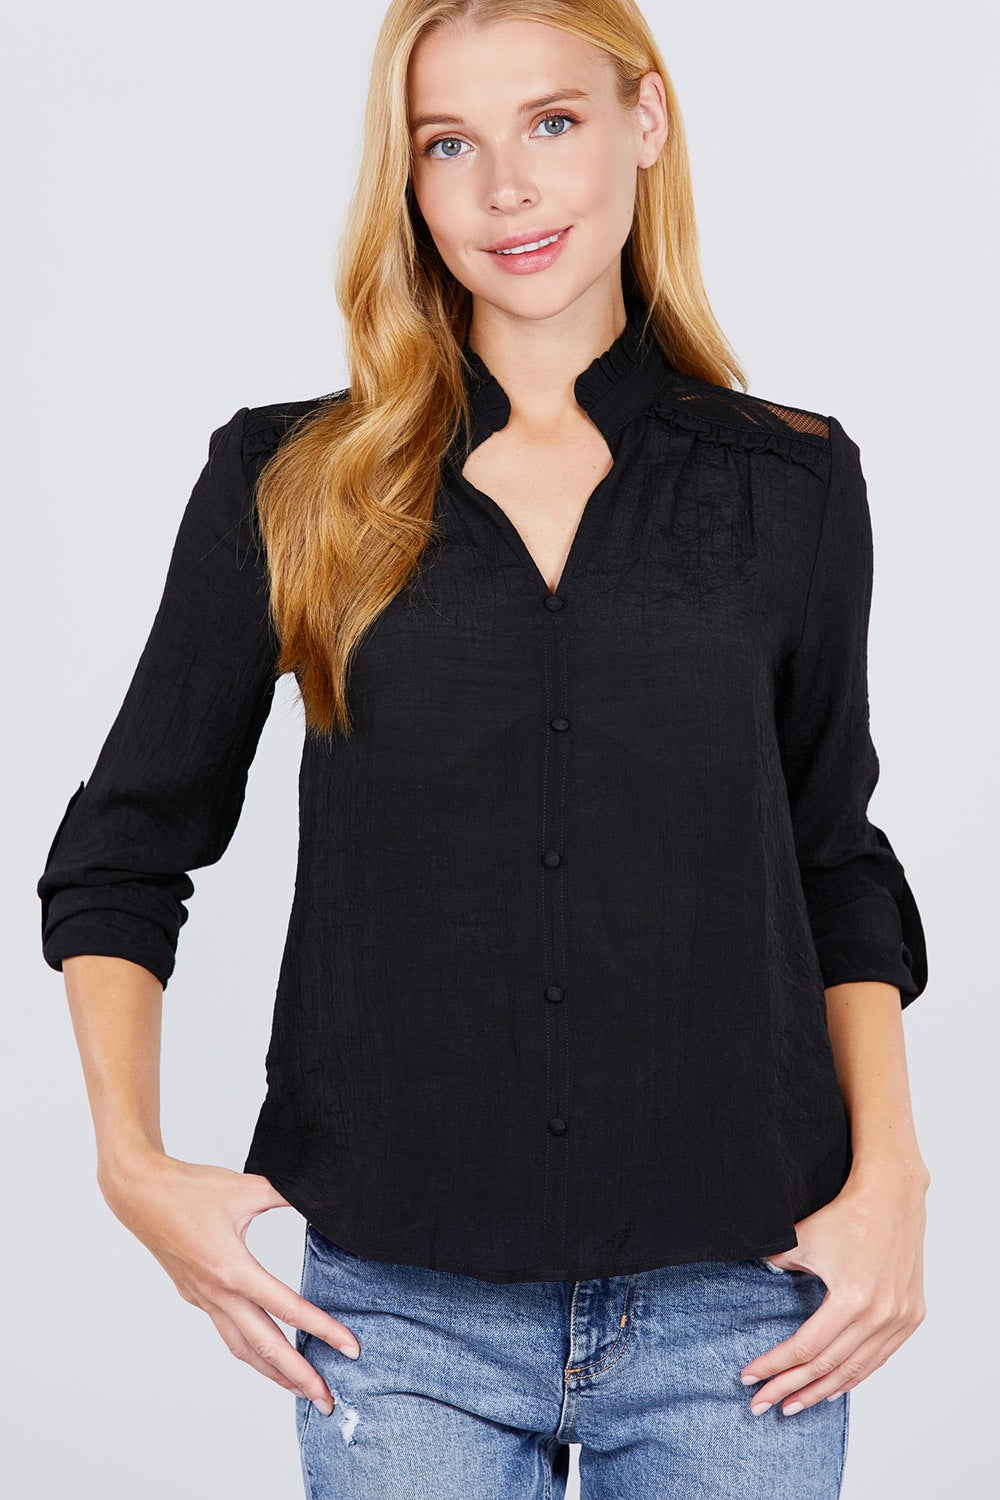 Long Sleeve V-neck Button Down Woven Top Women Fall Tops in Black